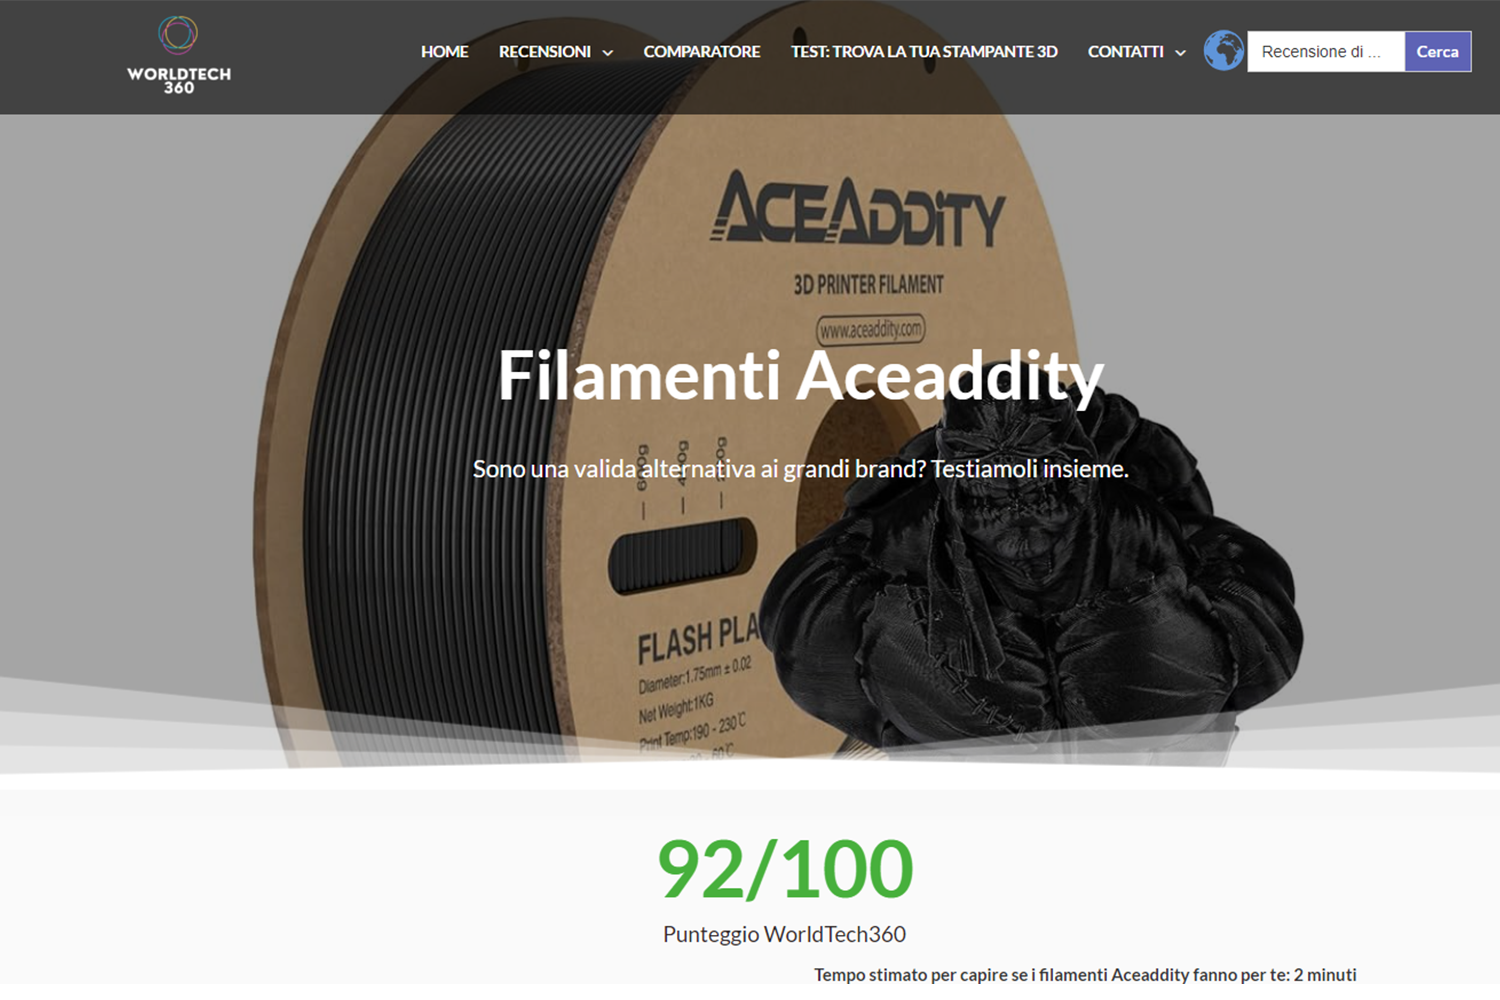 Aceaddity Filaments Shine in Worldtech's 3D Printing Review